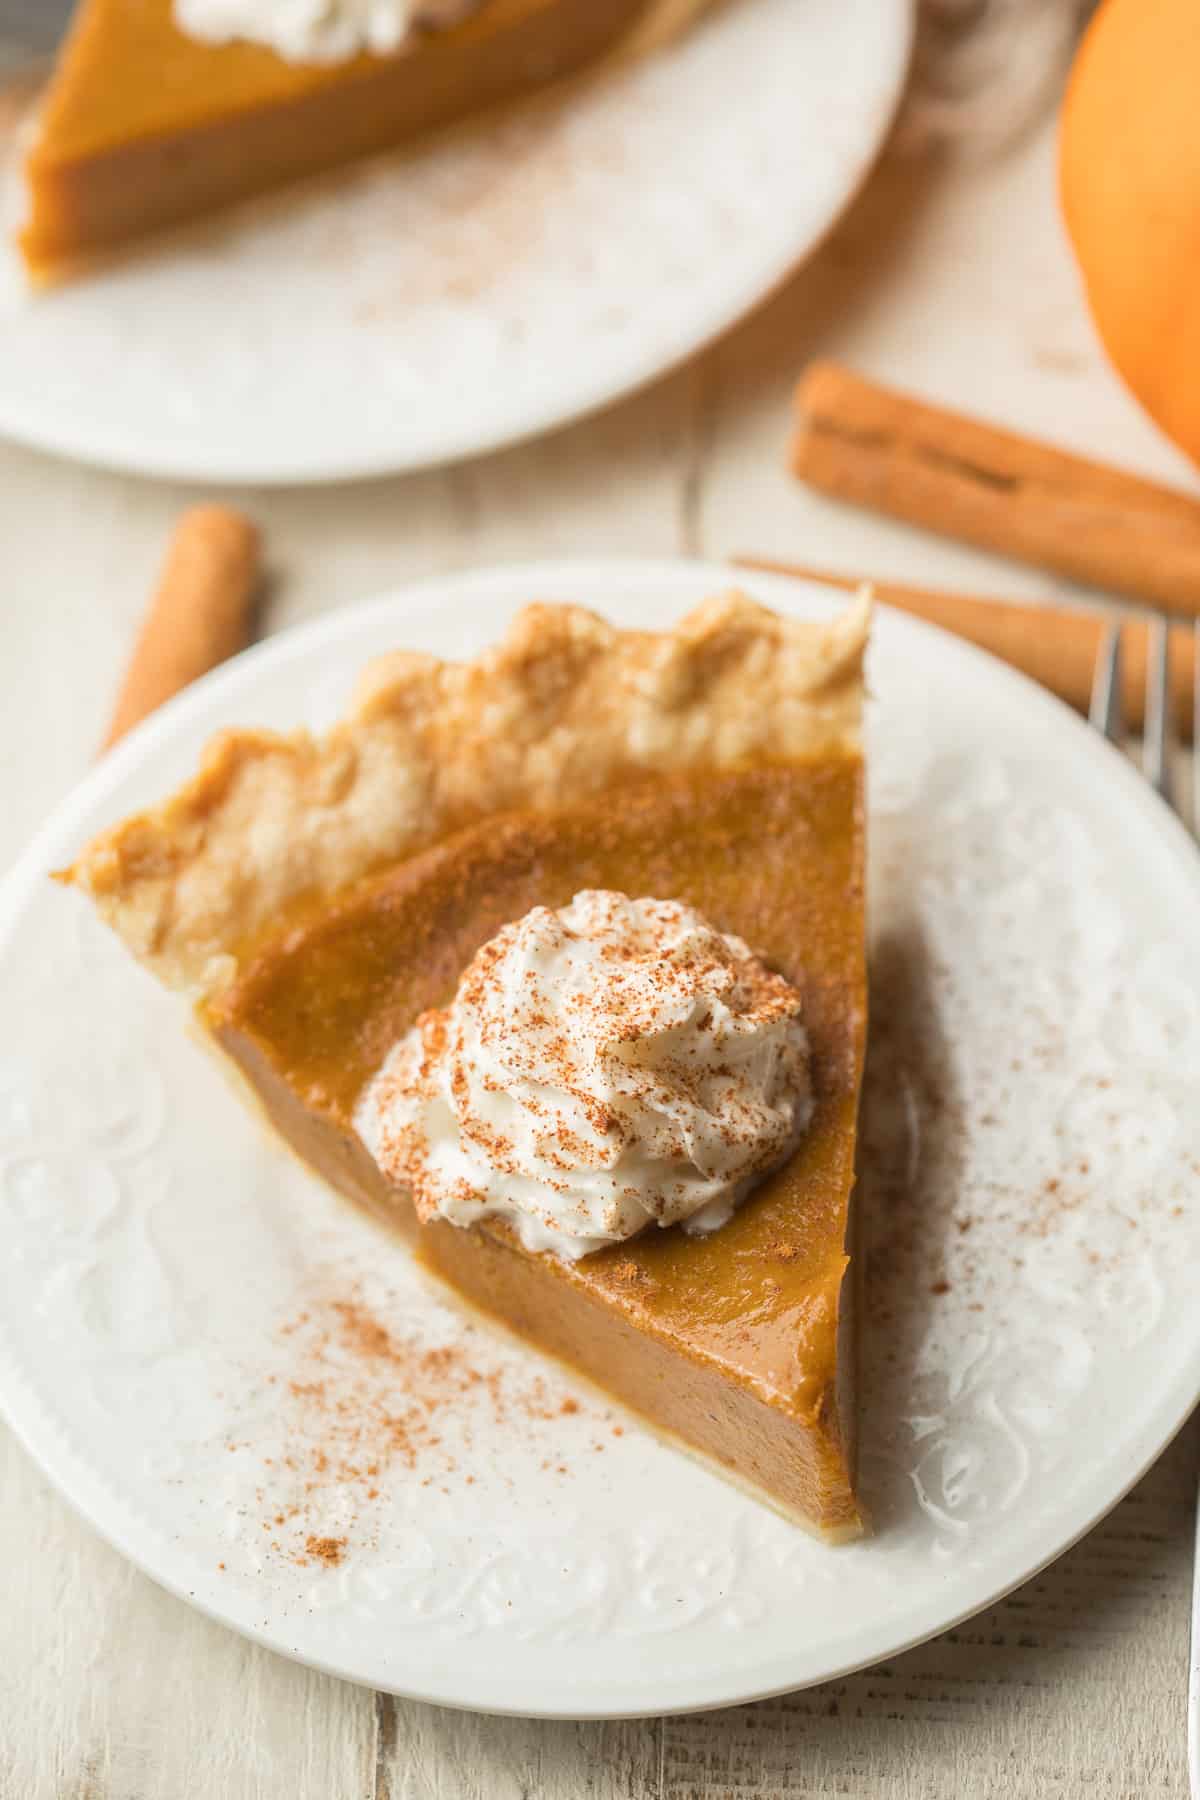 Slice of Vegan Pumpkin Pie Topped with Whipped Topping and Cinnamon.